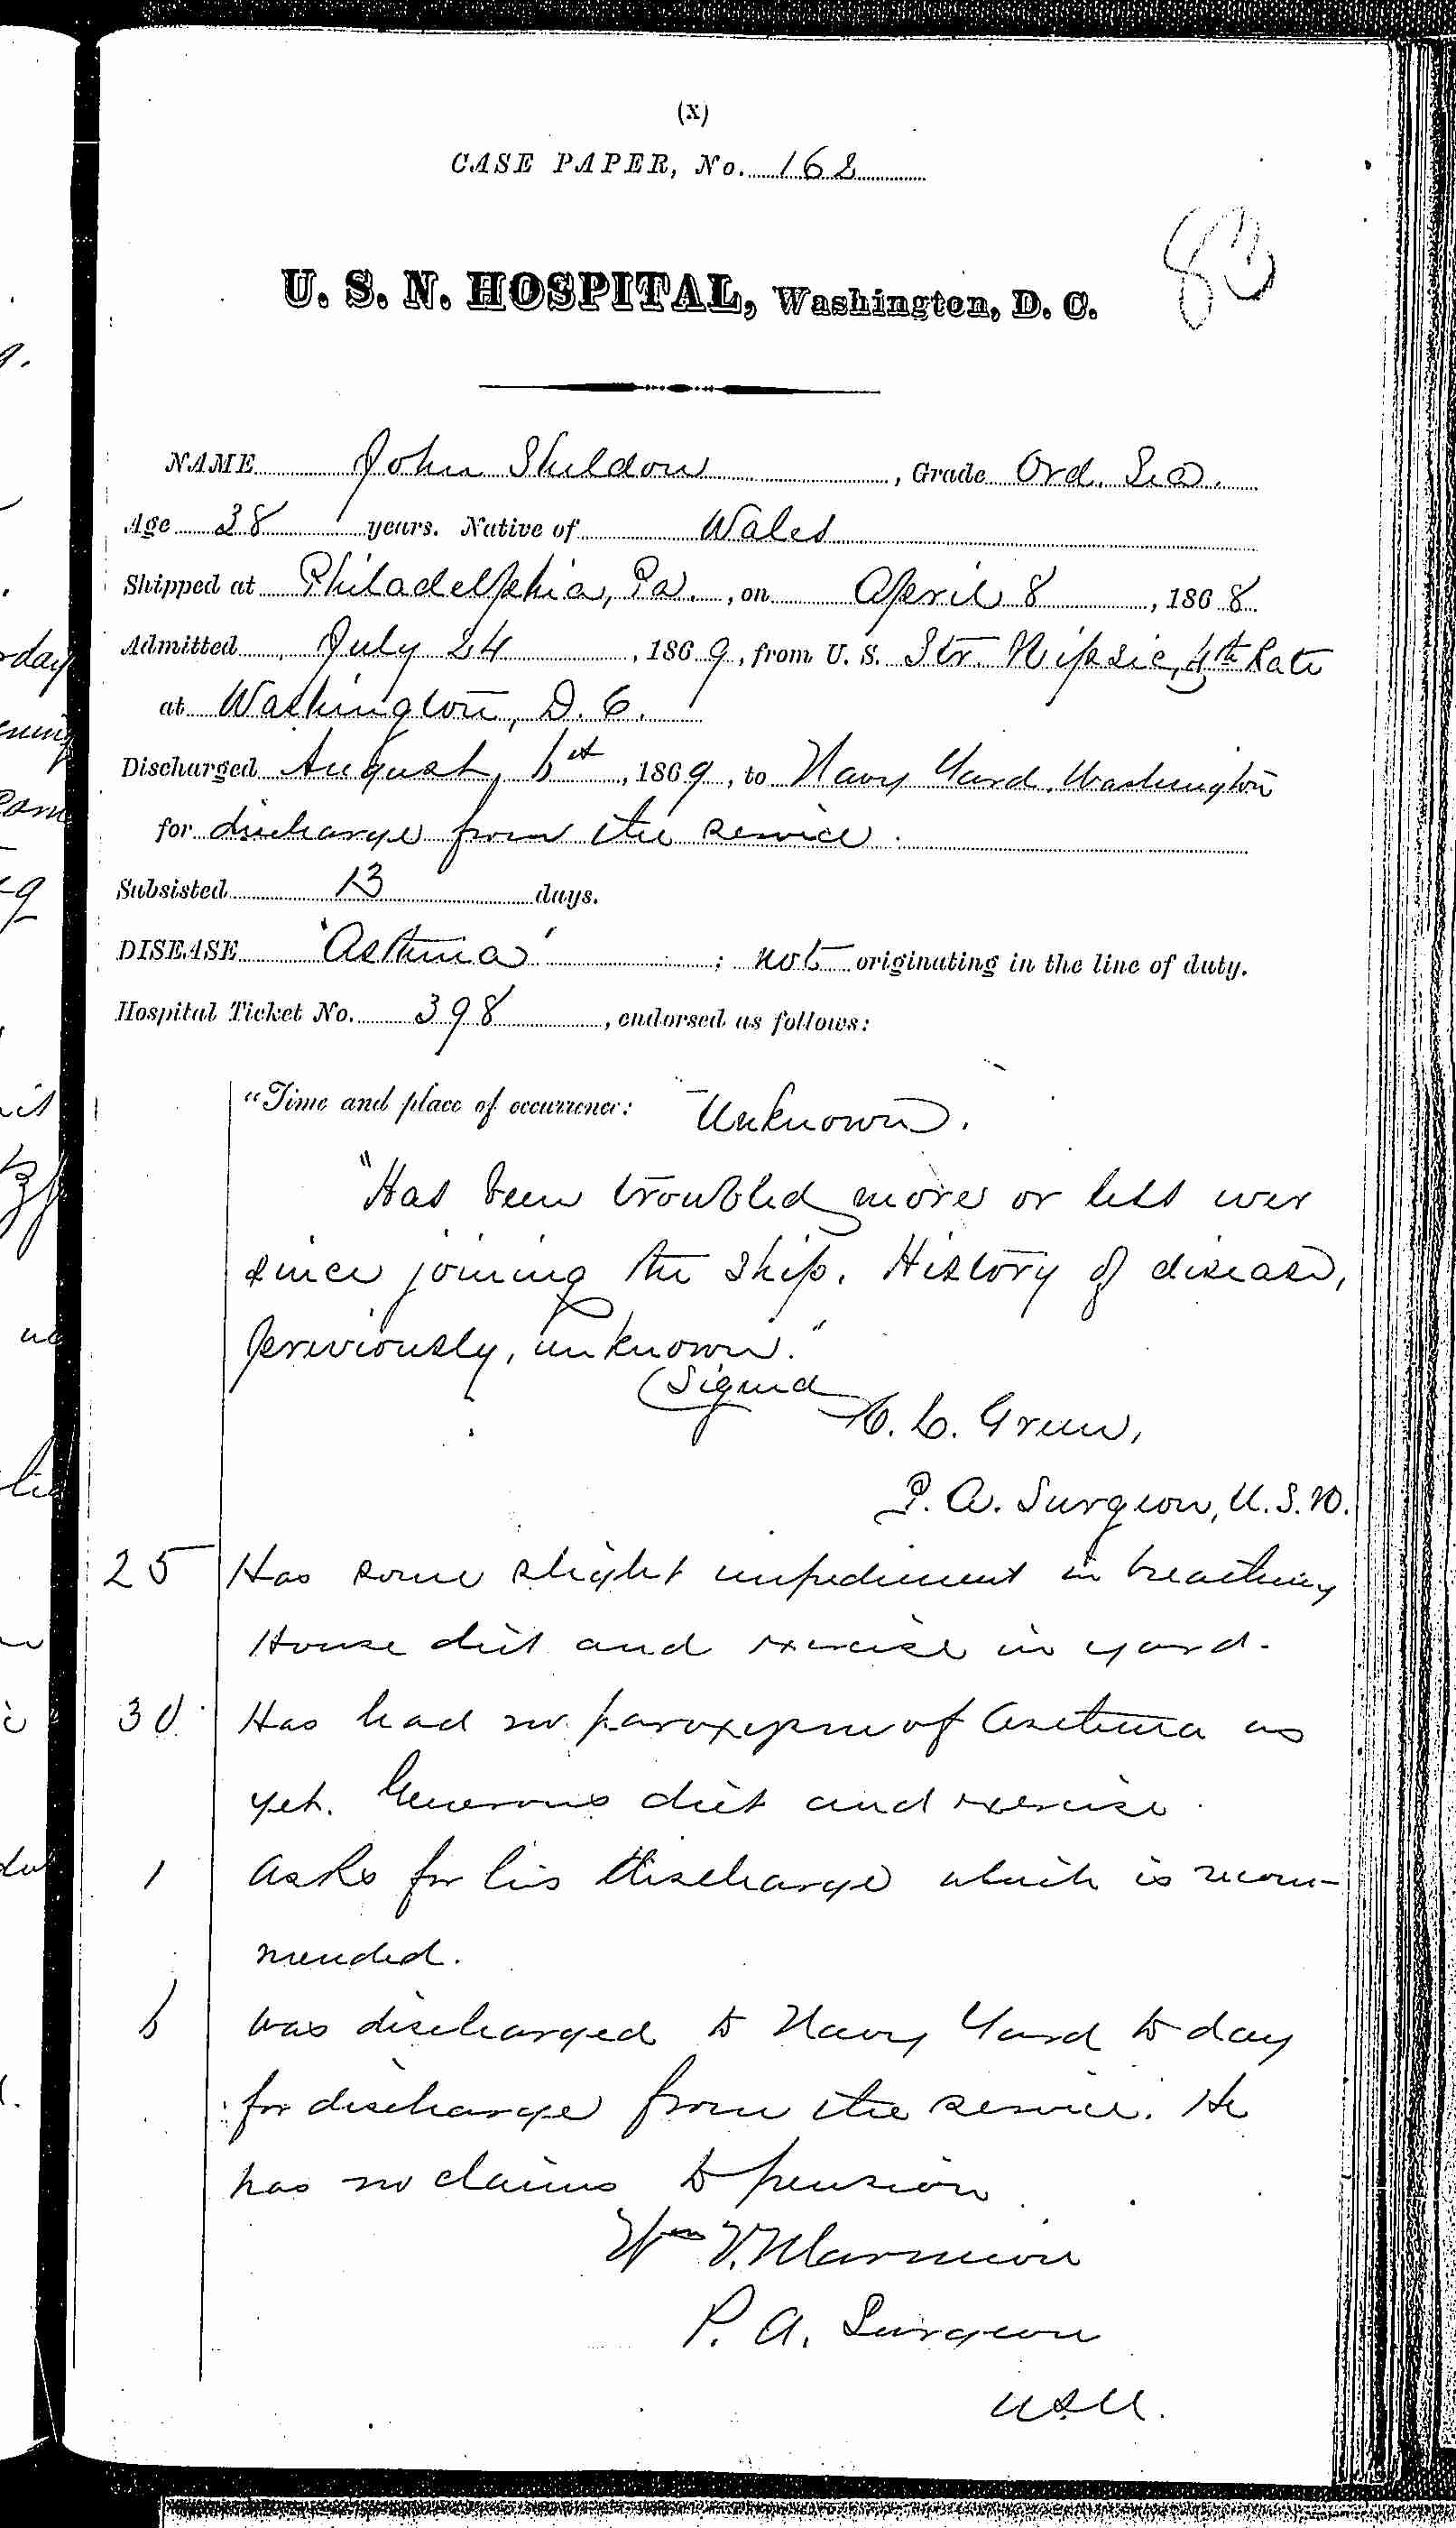 Entry for John Sheldon (page 1 of 1) in the log Hospital Tickets and Case Papers - Naval Hospital - Washington, D.C. - 1868-69